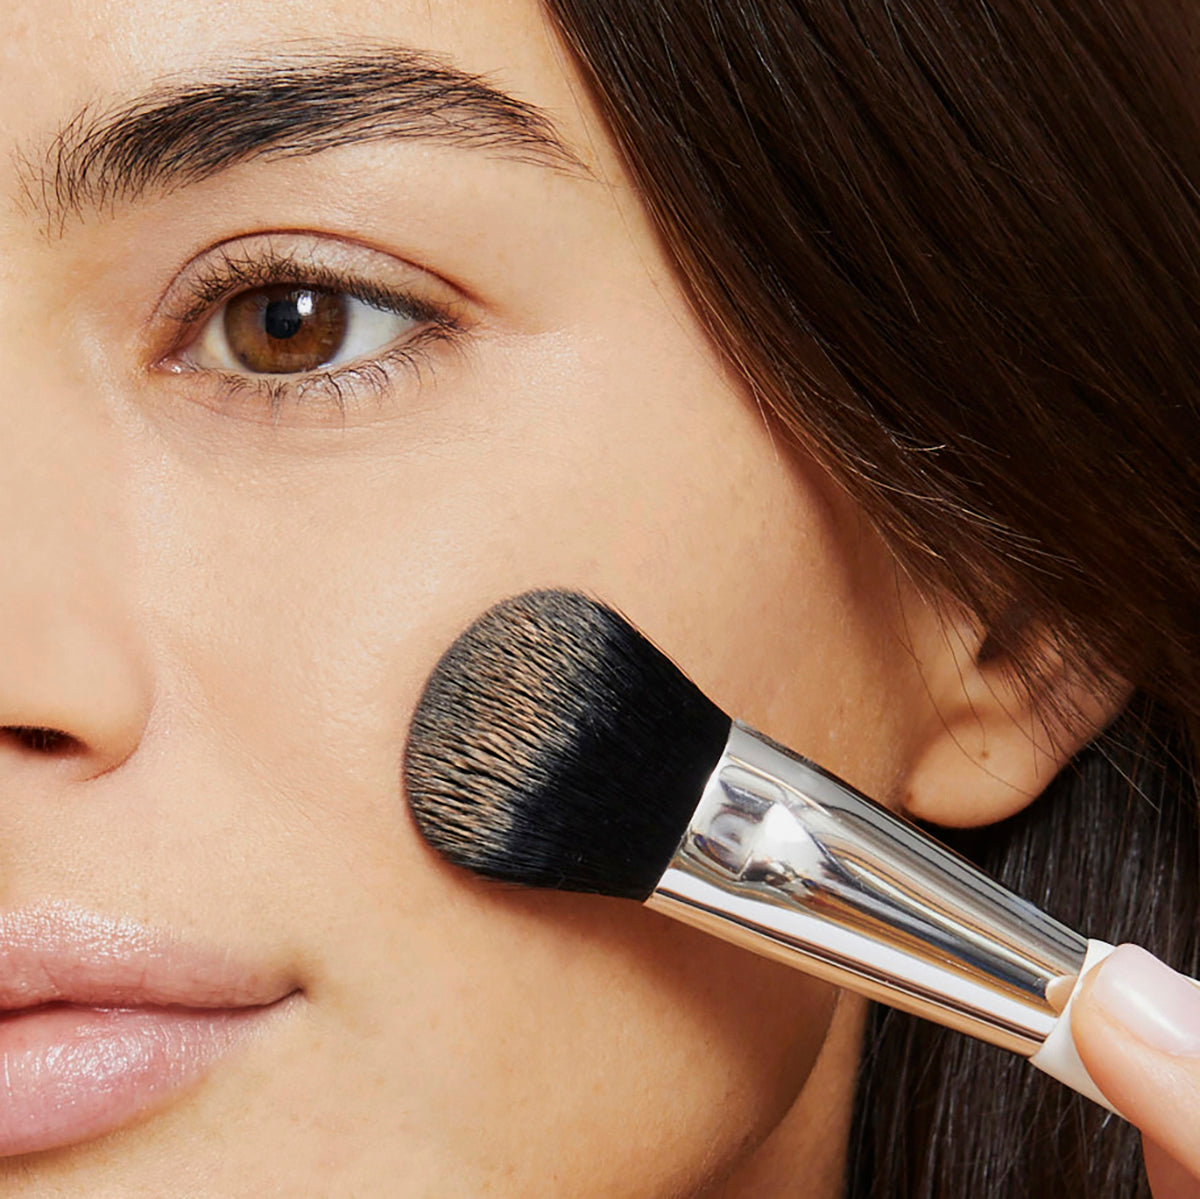 Application of creamy concealer or foundation to under eyes and on blemishes using the smaller end of the Woosh Complexion brush 